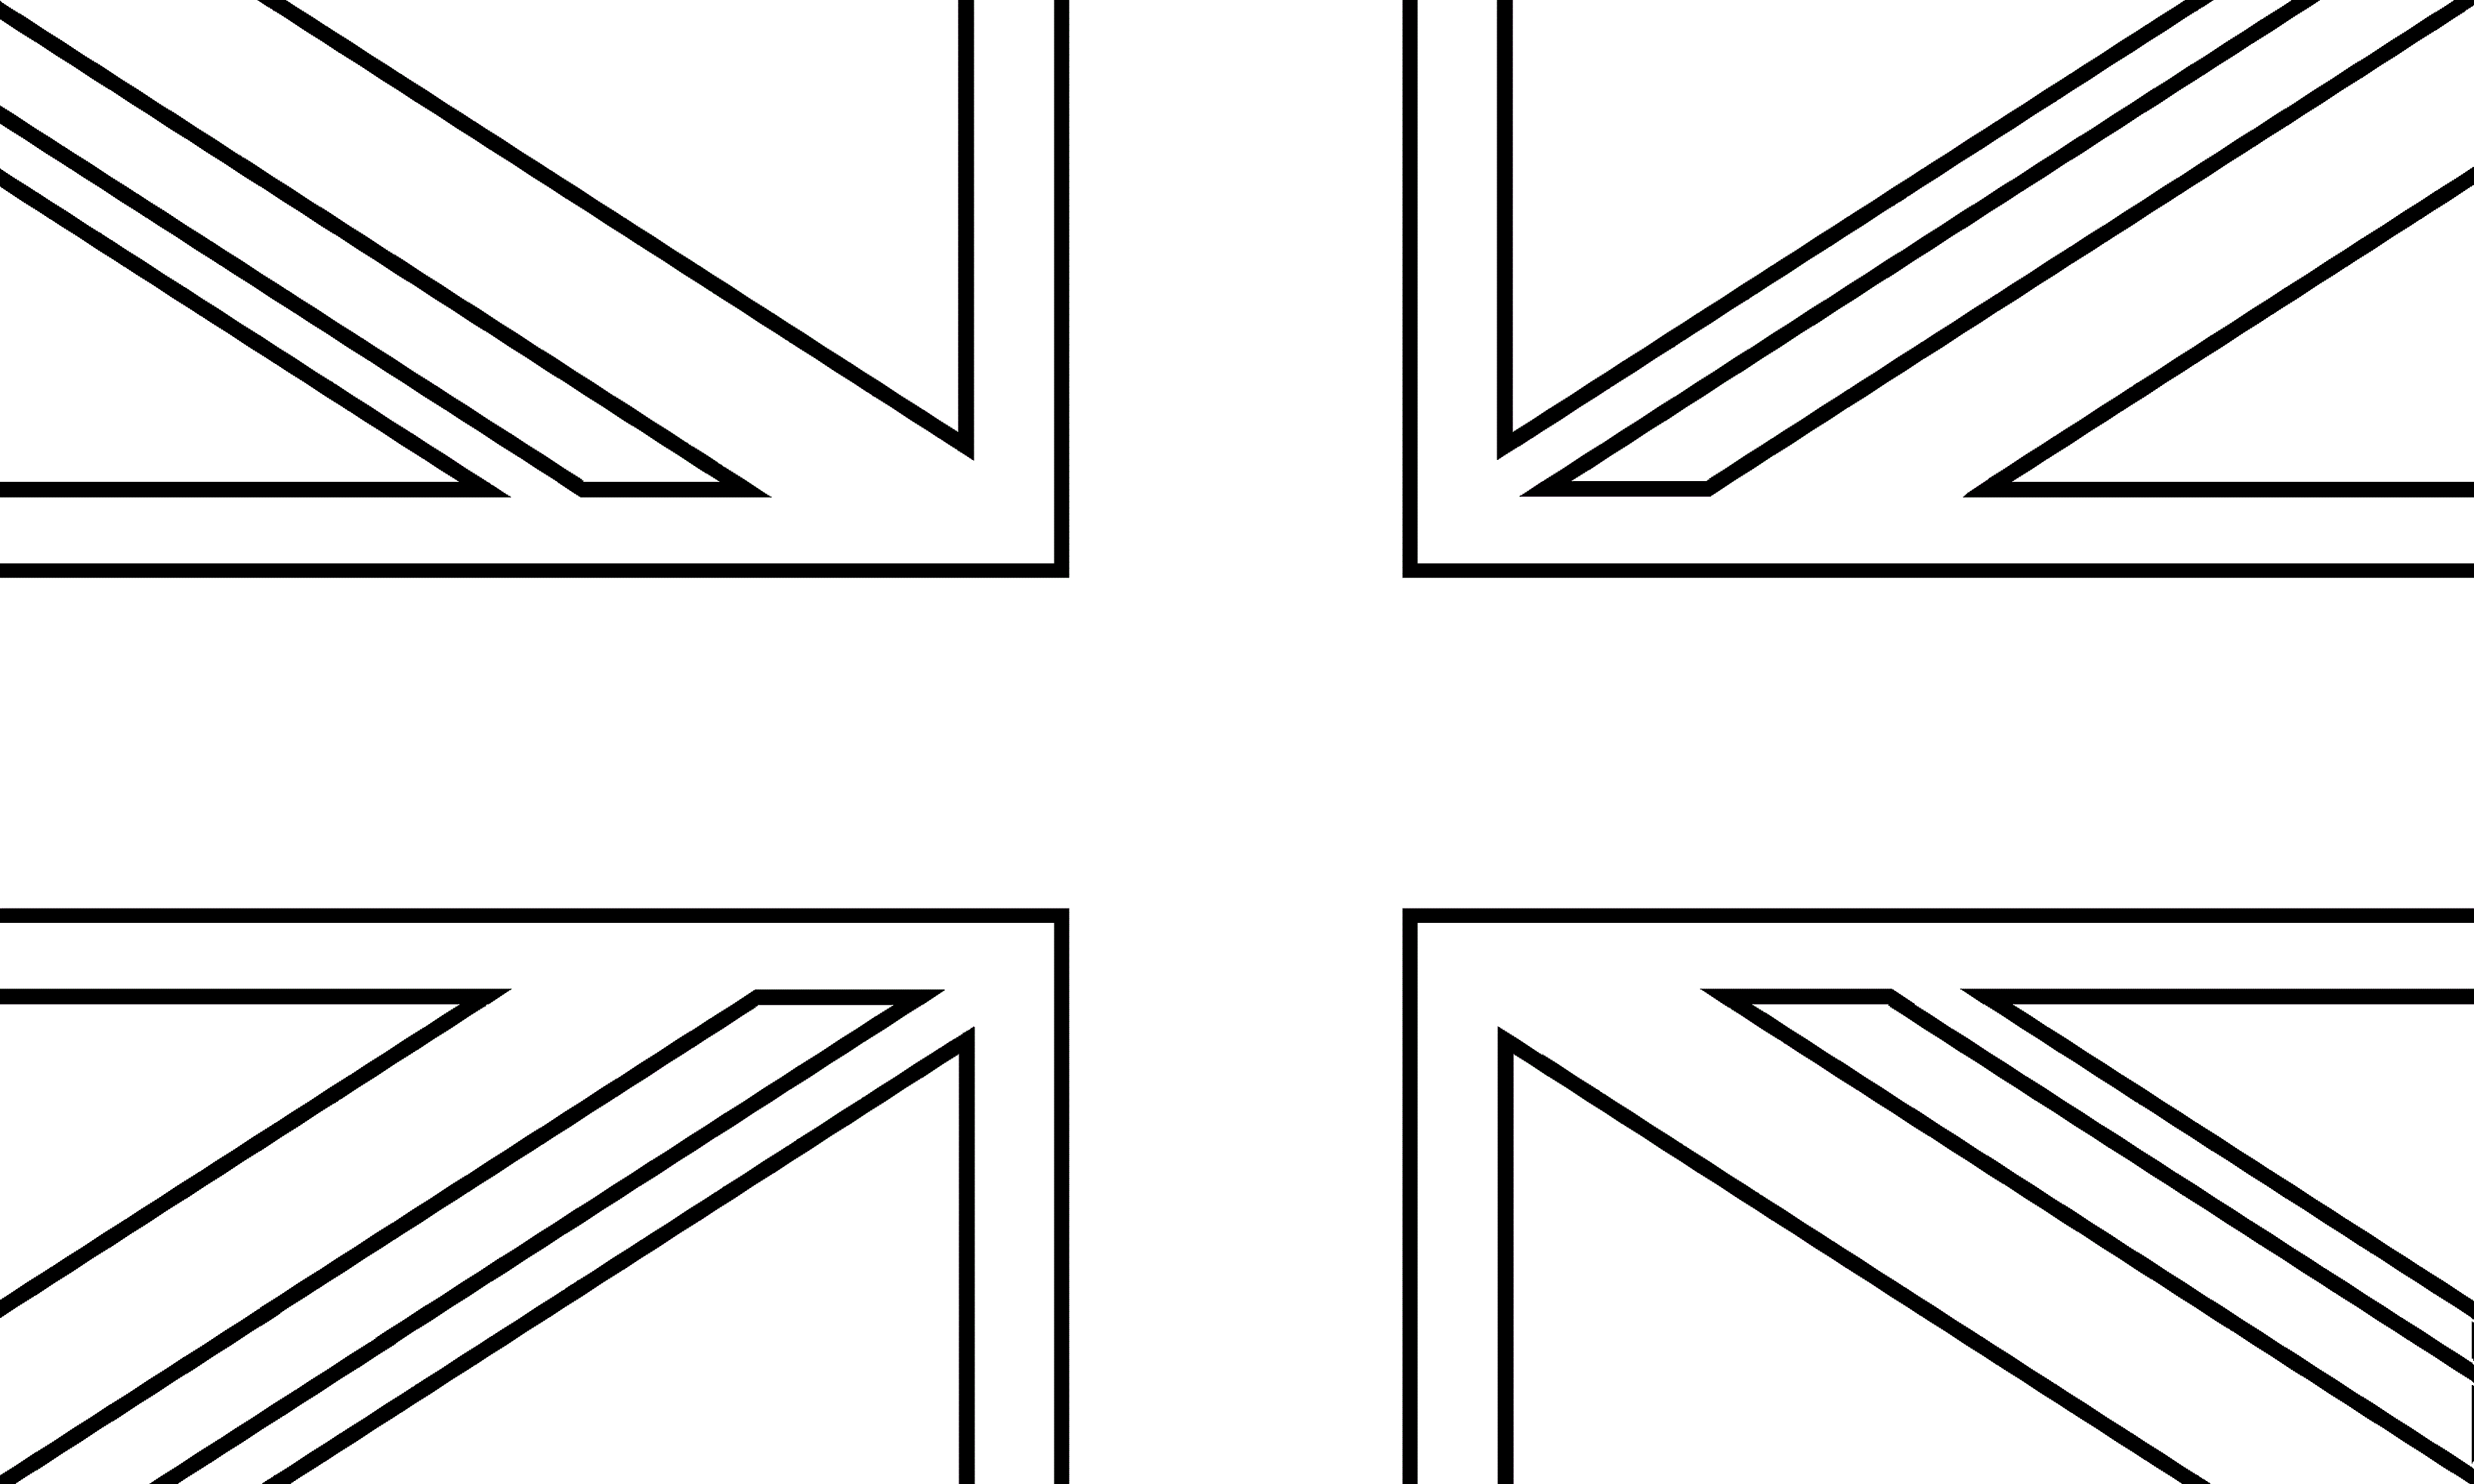 colouring pages union jack flag beautiful inspiration union jack template to colour flag colouring union pages flag jack 